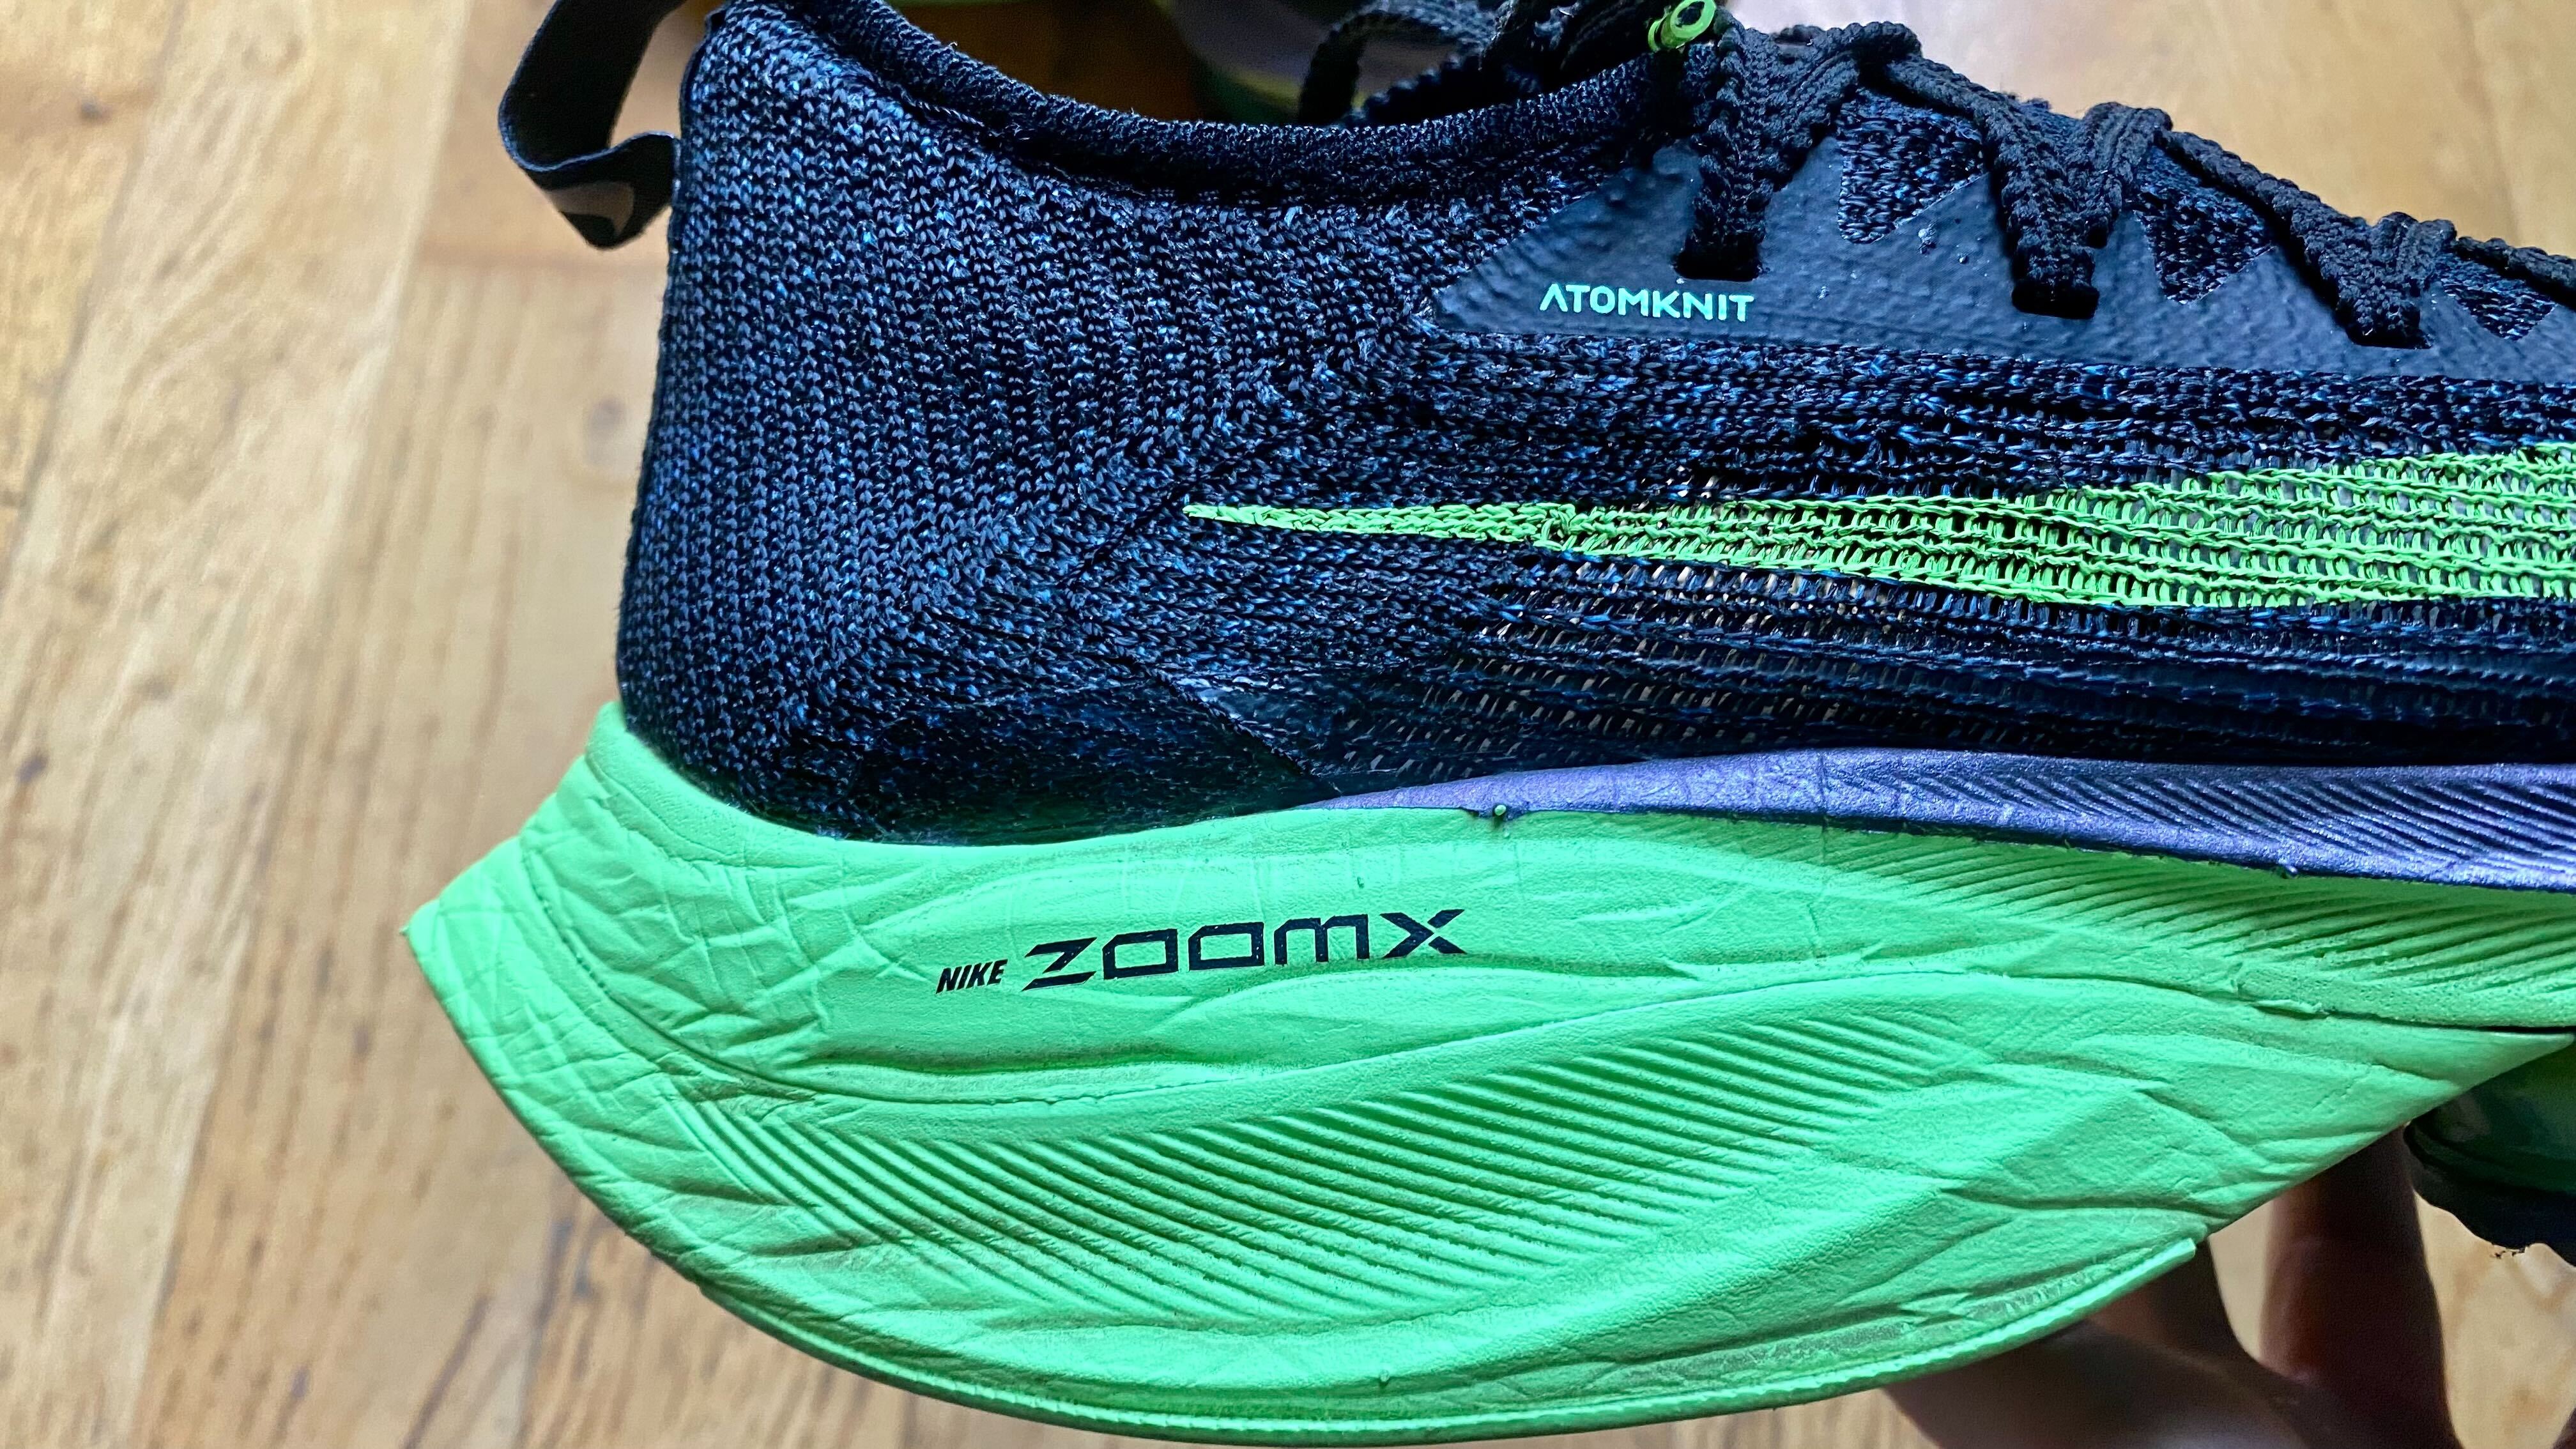 A photo of the ZoomX midsole in the Nike Air Zoom Alphafly Next% Flyknit